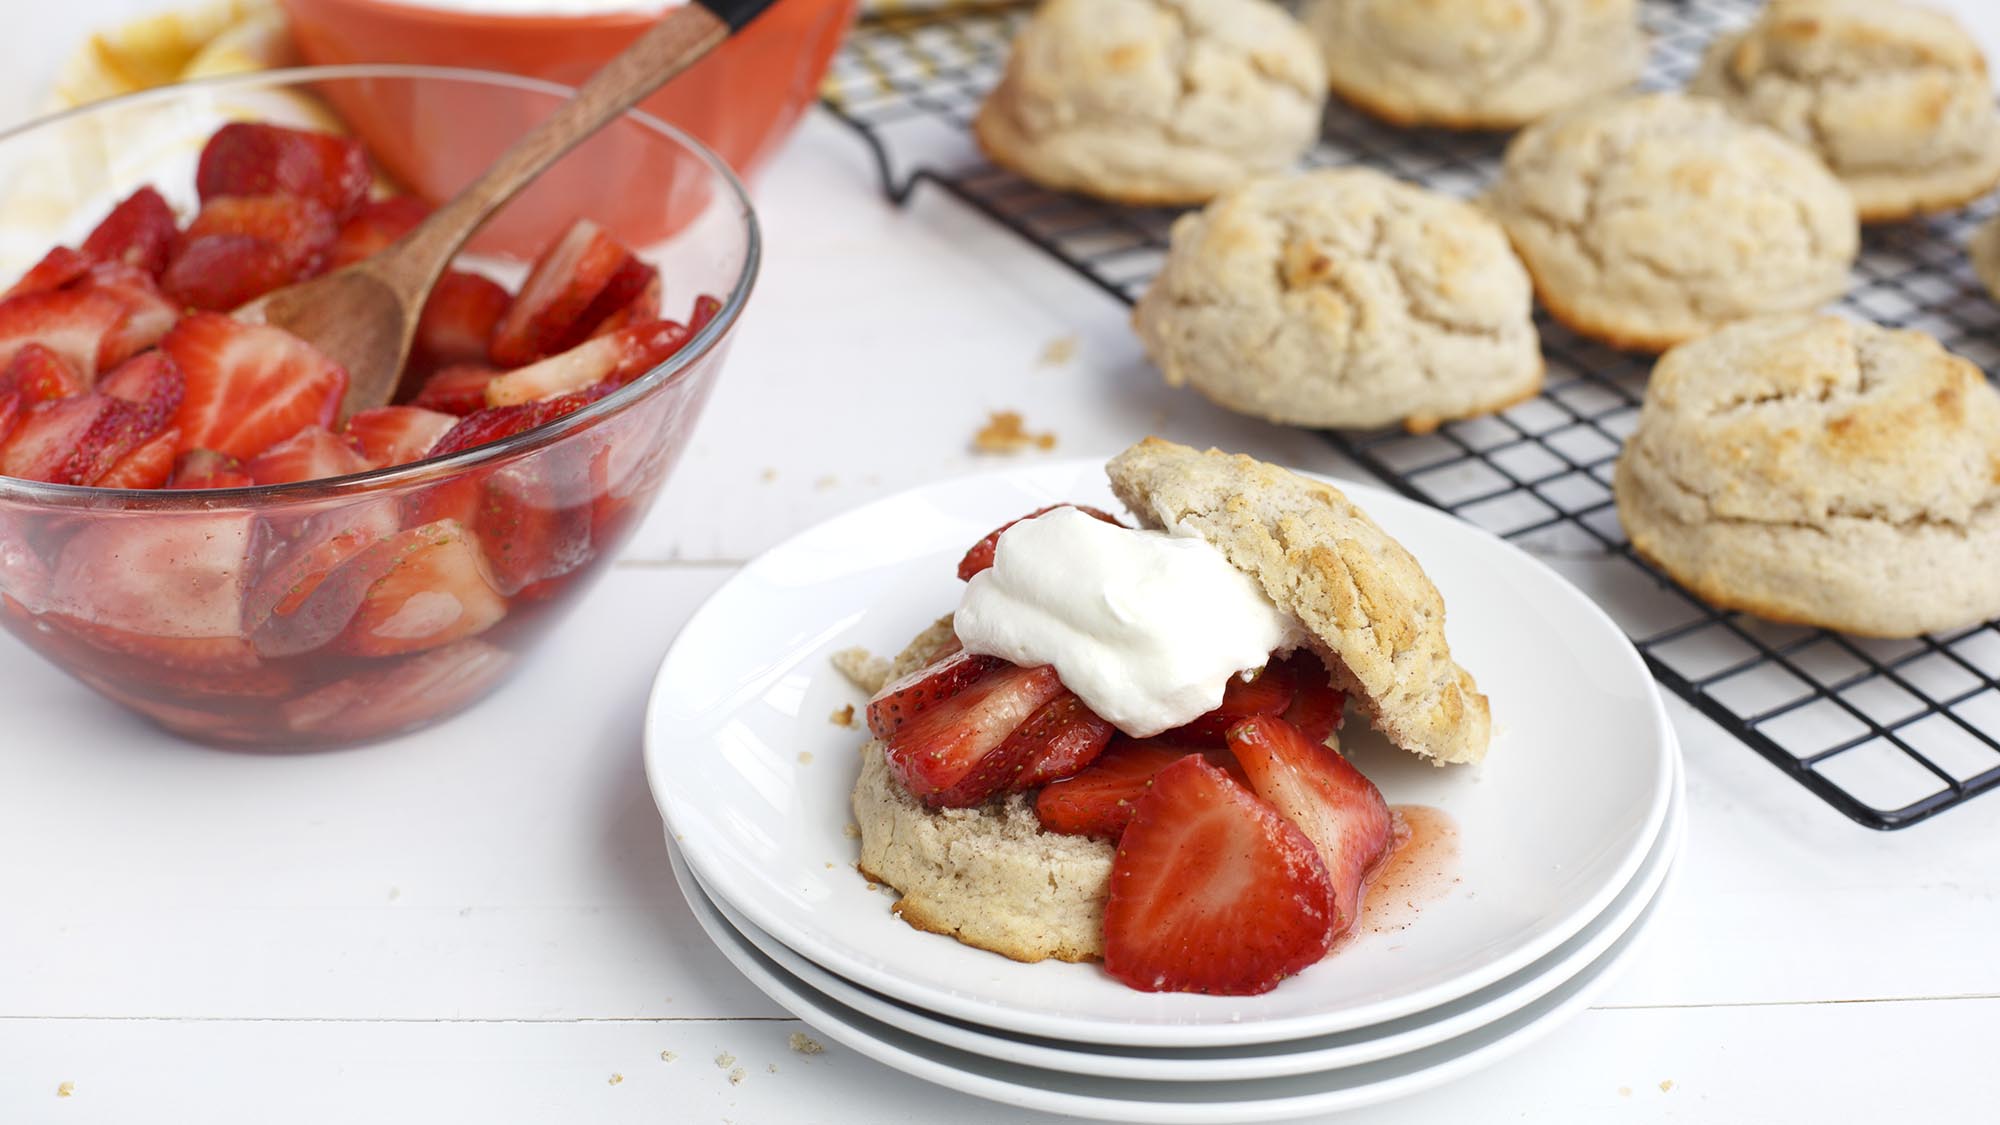 McCormick Spiced Strawberry Shortcakes